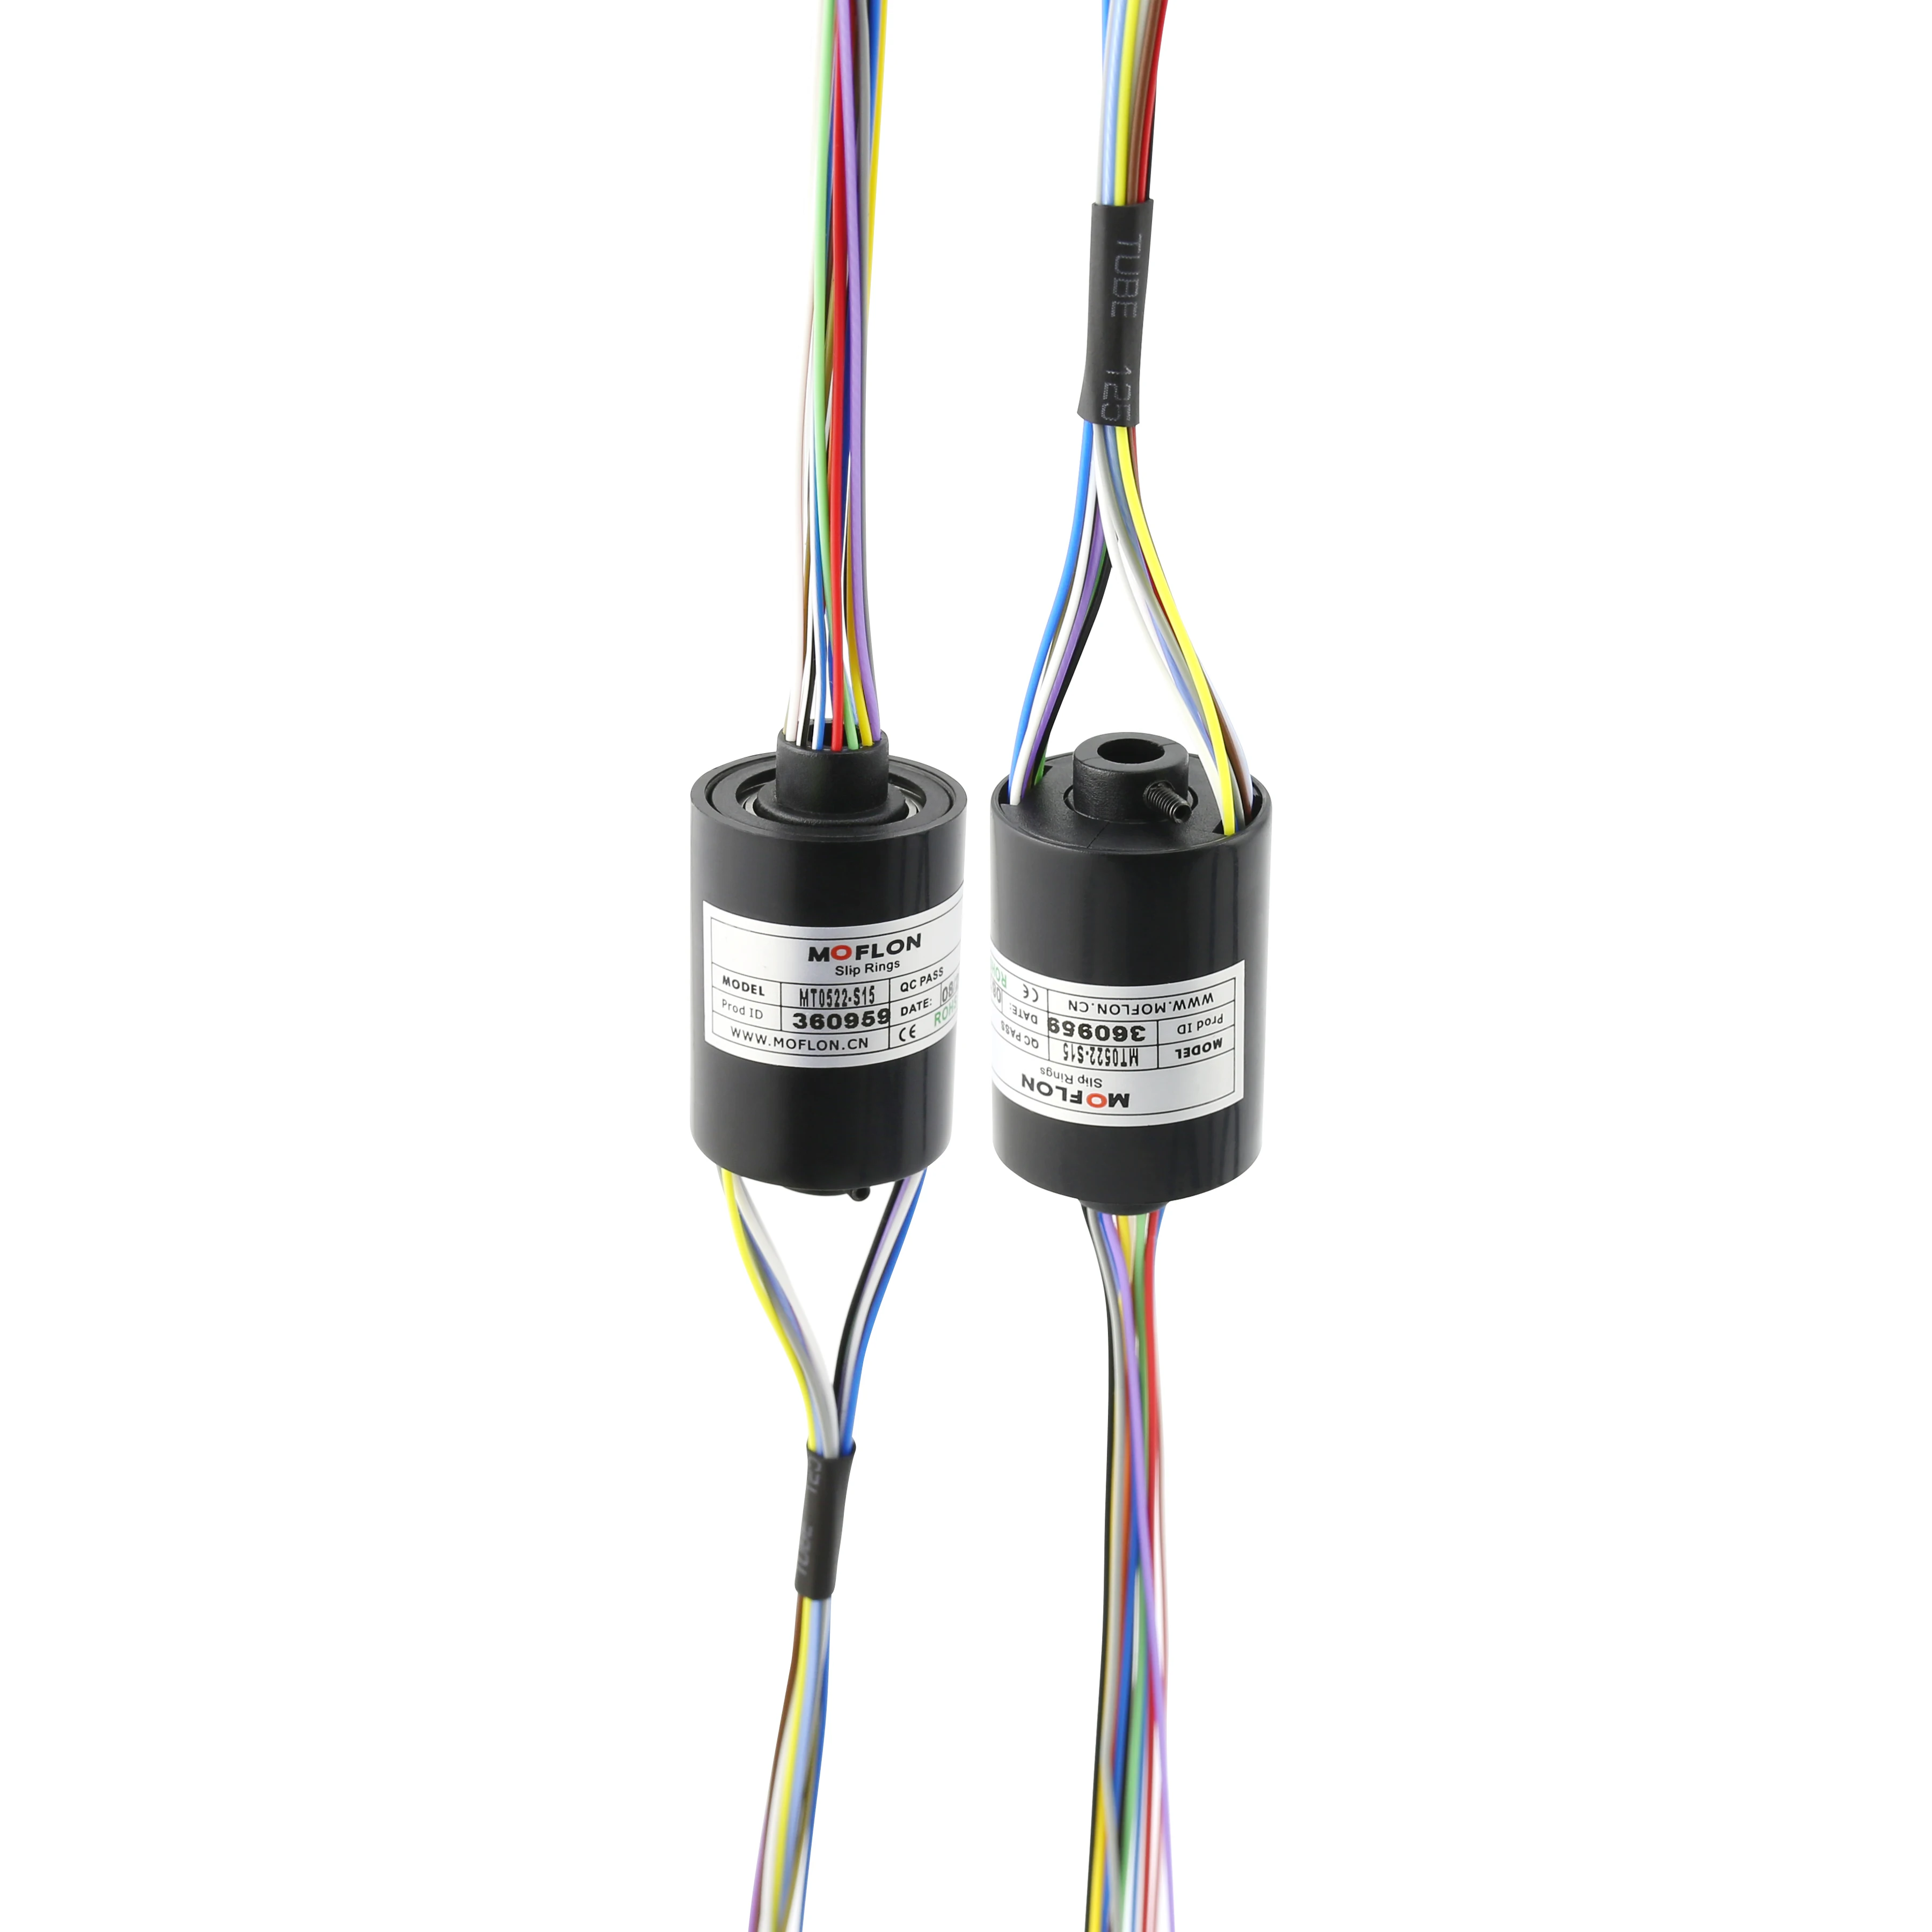 ,24 wires/10A each,MOFLON slip ring 0.5" MT1256 SLIP RINGS WITH BORE SIZE 12.7mm 